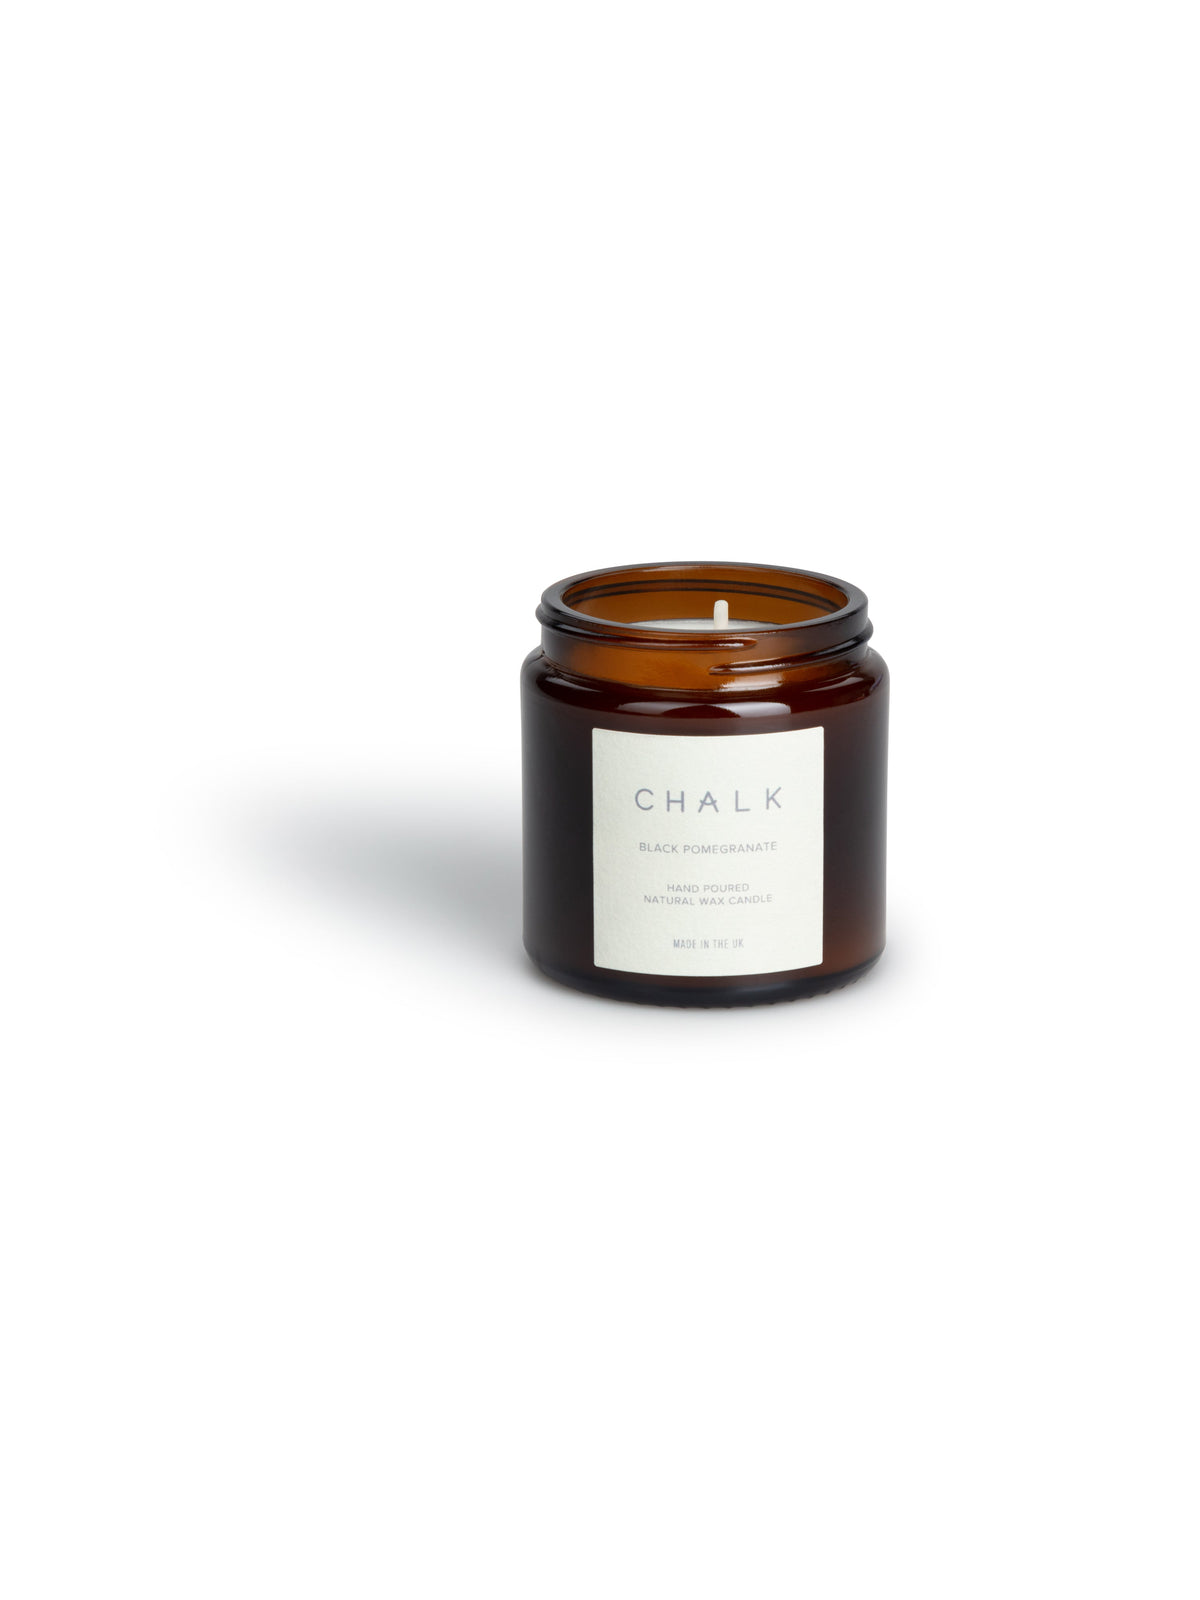 Amber Glass Apothecary Jar Candle | Black Pomegranate | 96g